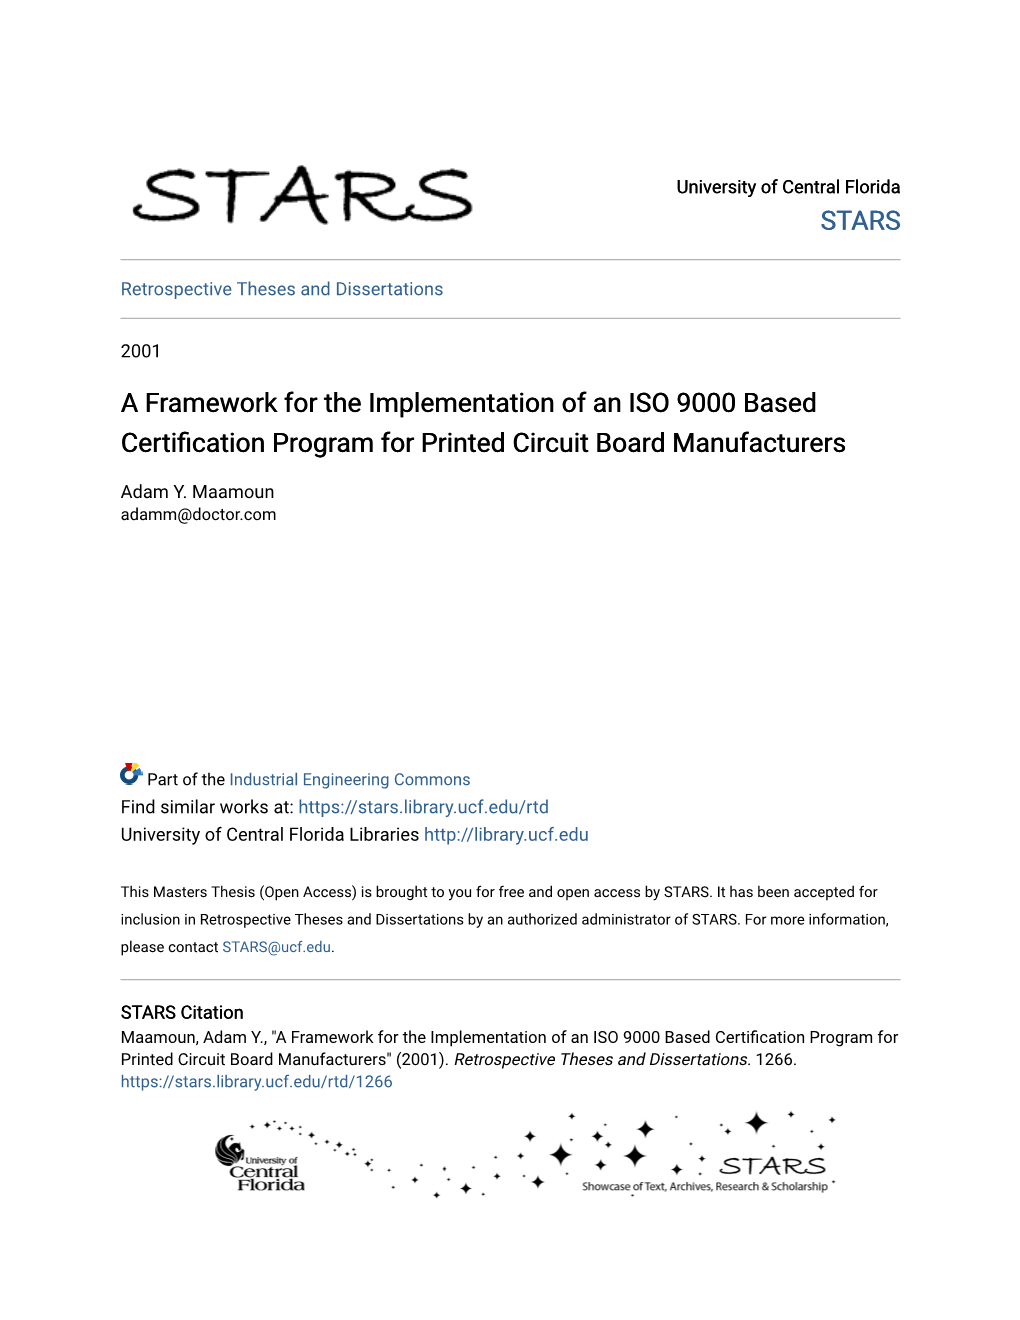 A Framework for the Implementation of an ISO 9000 Based Certification Program for Printed Circuit Board Manufacturers